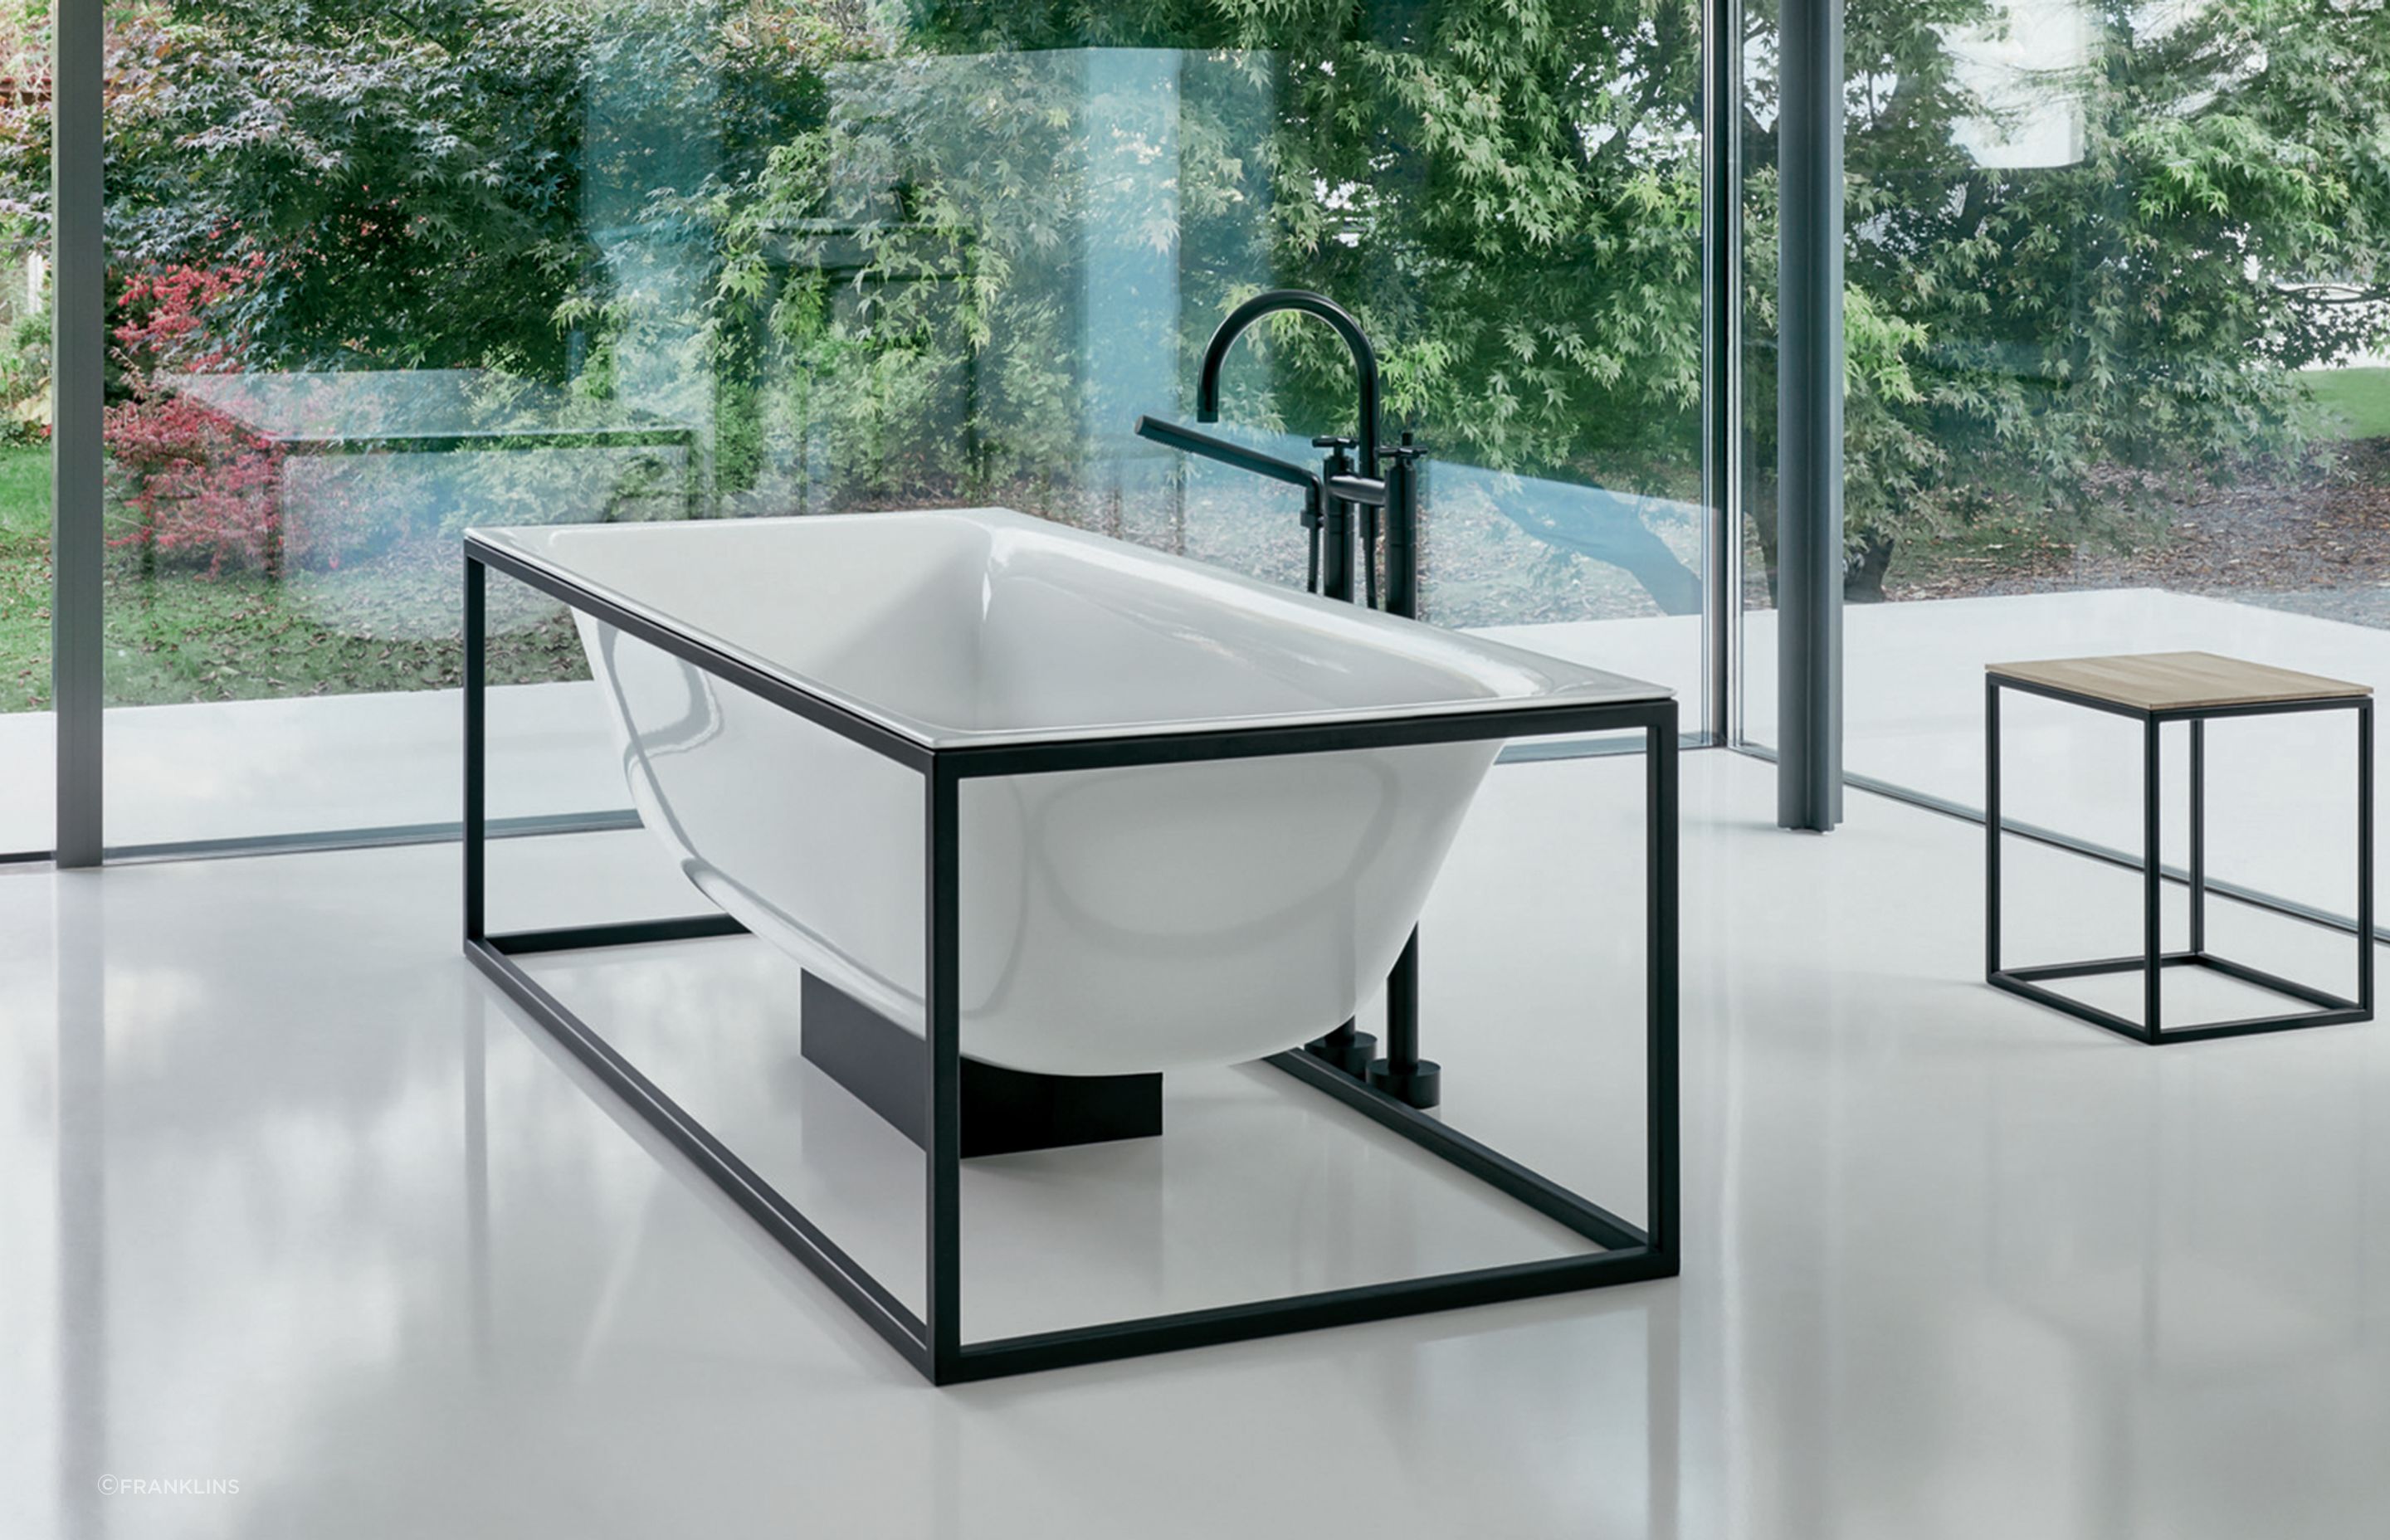 Powder-coated steel frames bring out all the beauty of the BetteLux Shape Freestanding Bath and keep it weightless in the room